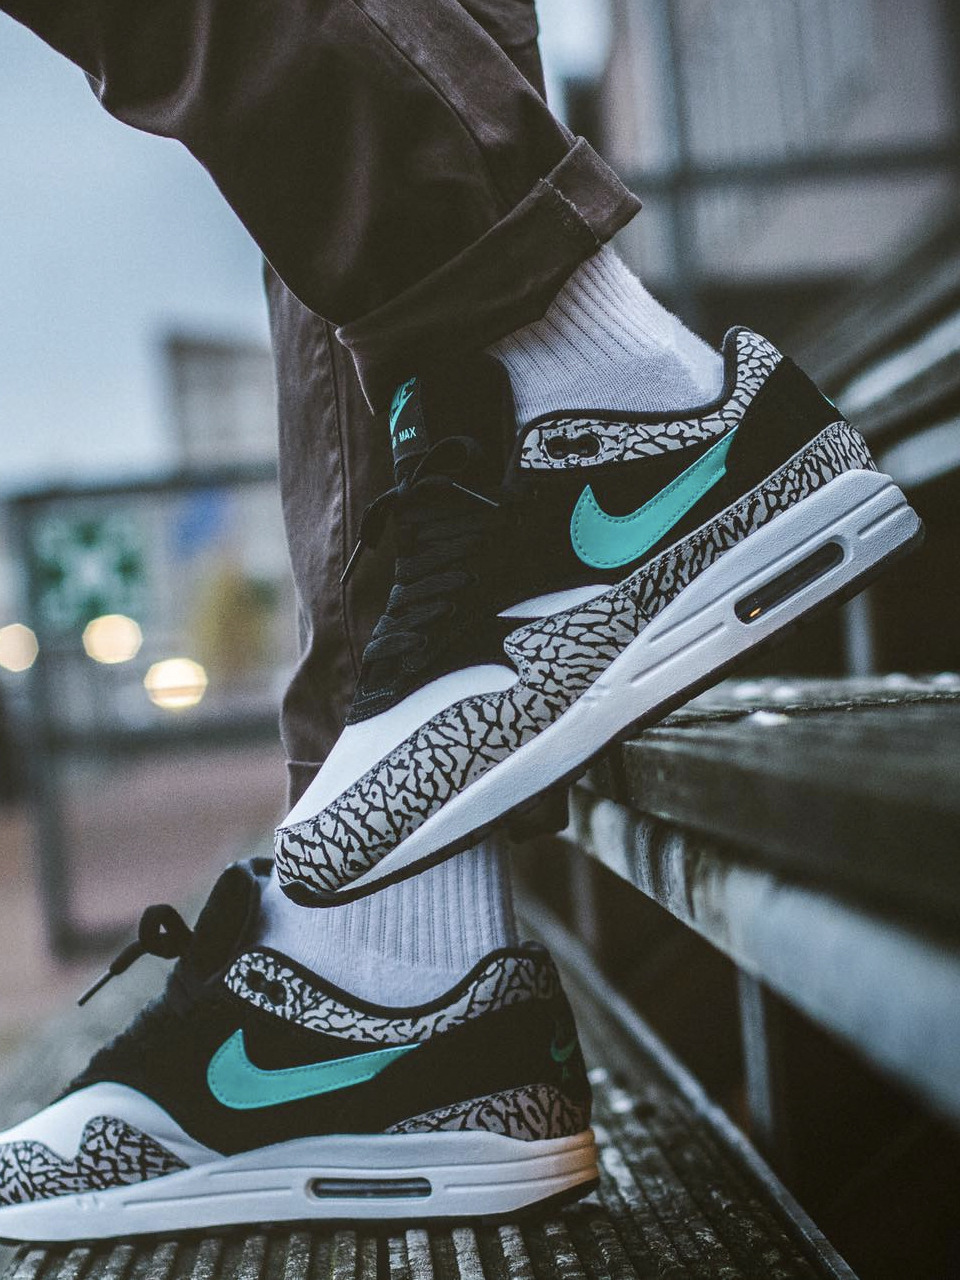 Atmos x Nike Air Max 1 ‘Elephant’ (by maikelboeve) – Sweetsoles